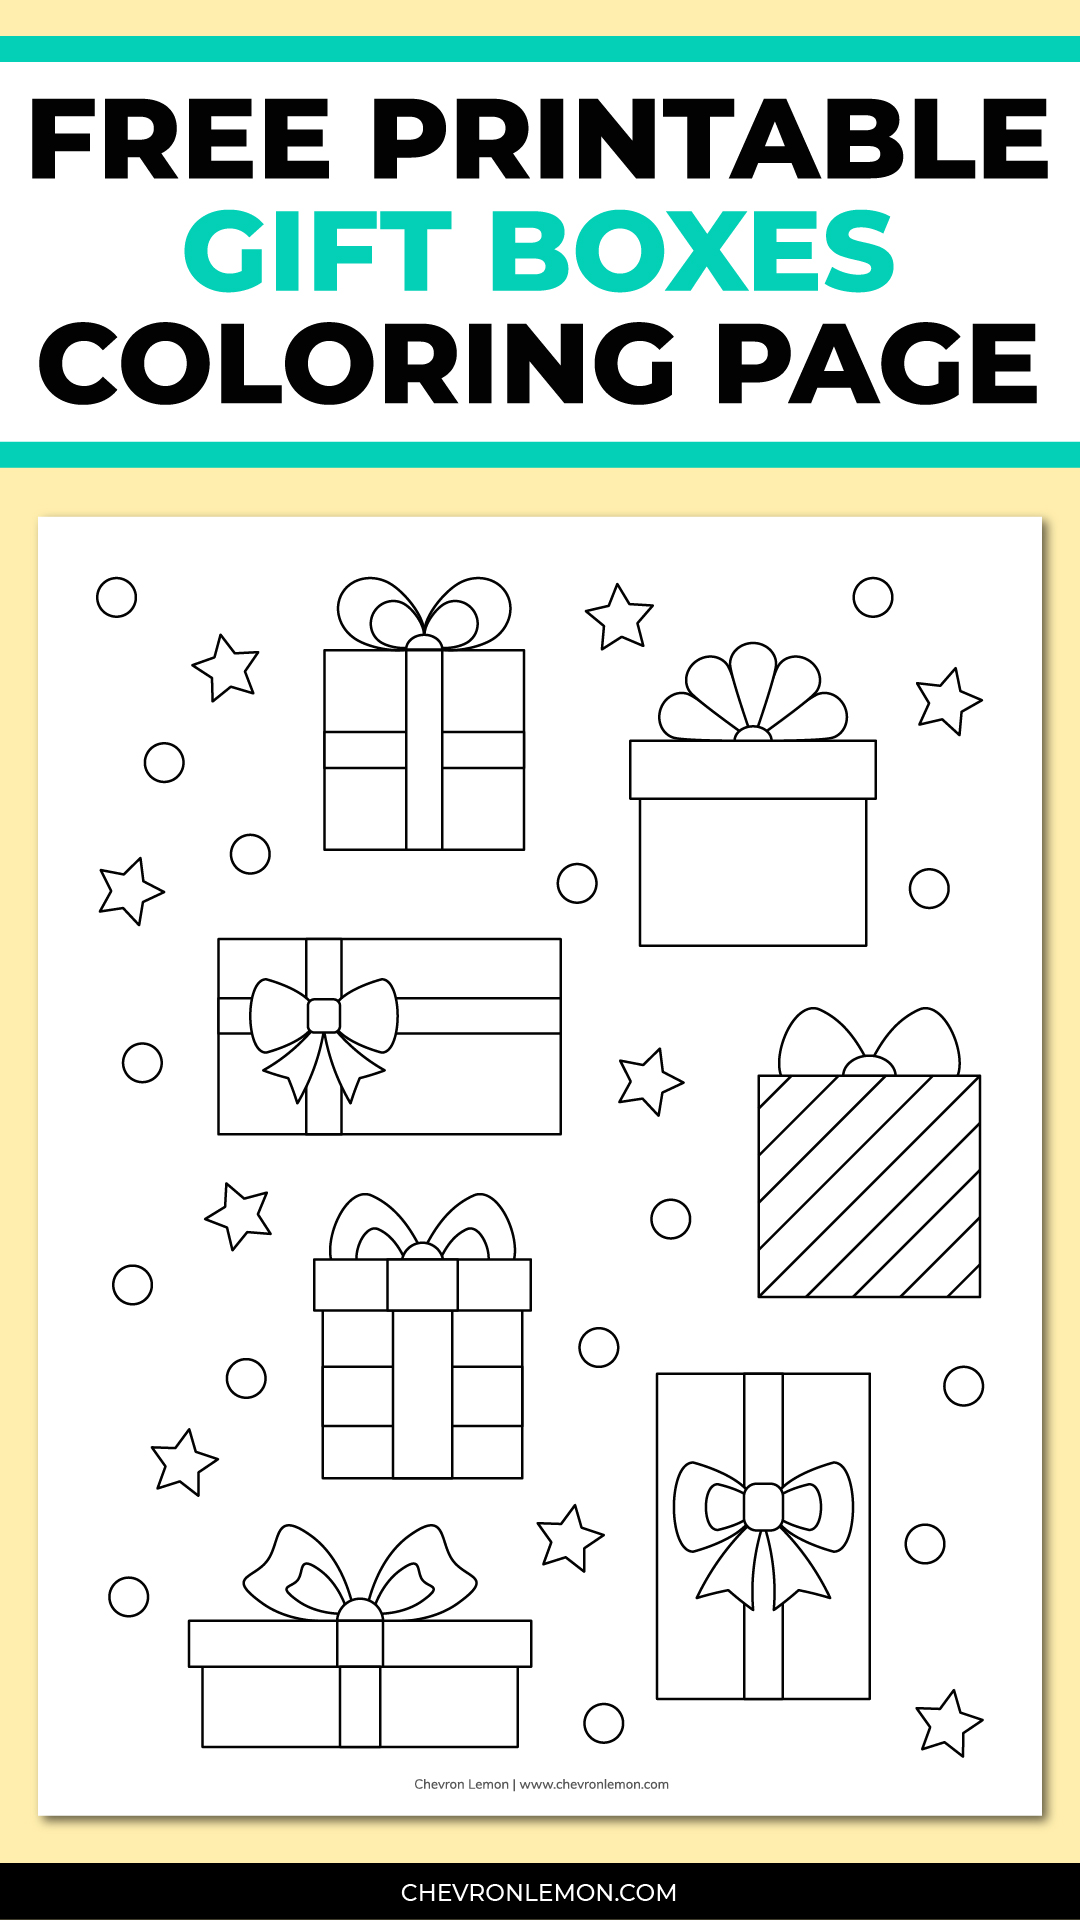 Gift boxes coloring page